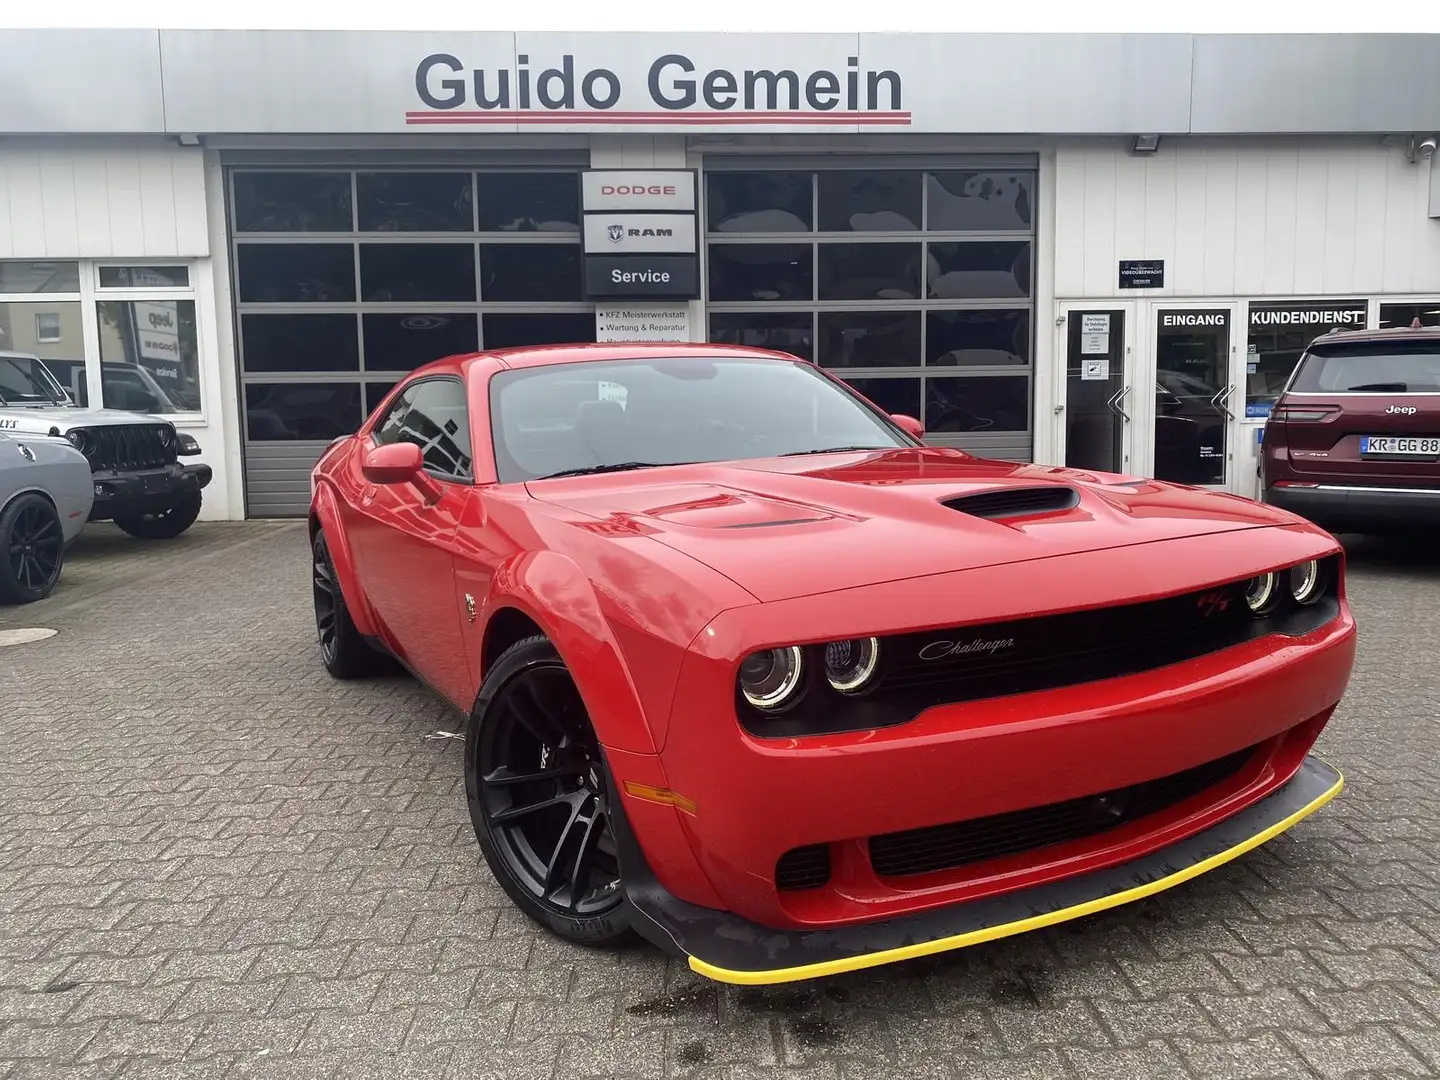 Dodge Challenger R/T Scat Pack Widebody Last Call Red - 1